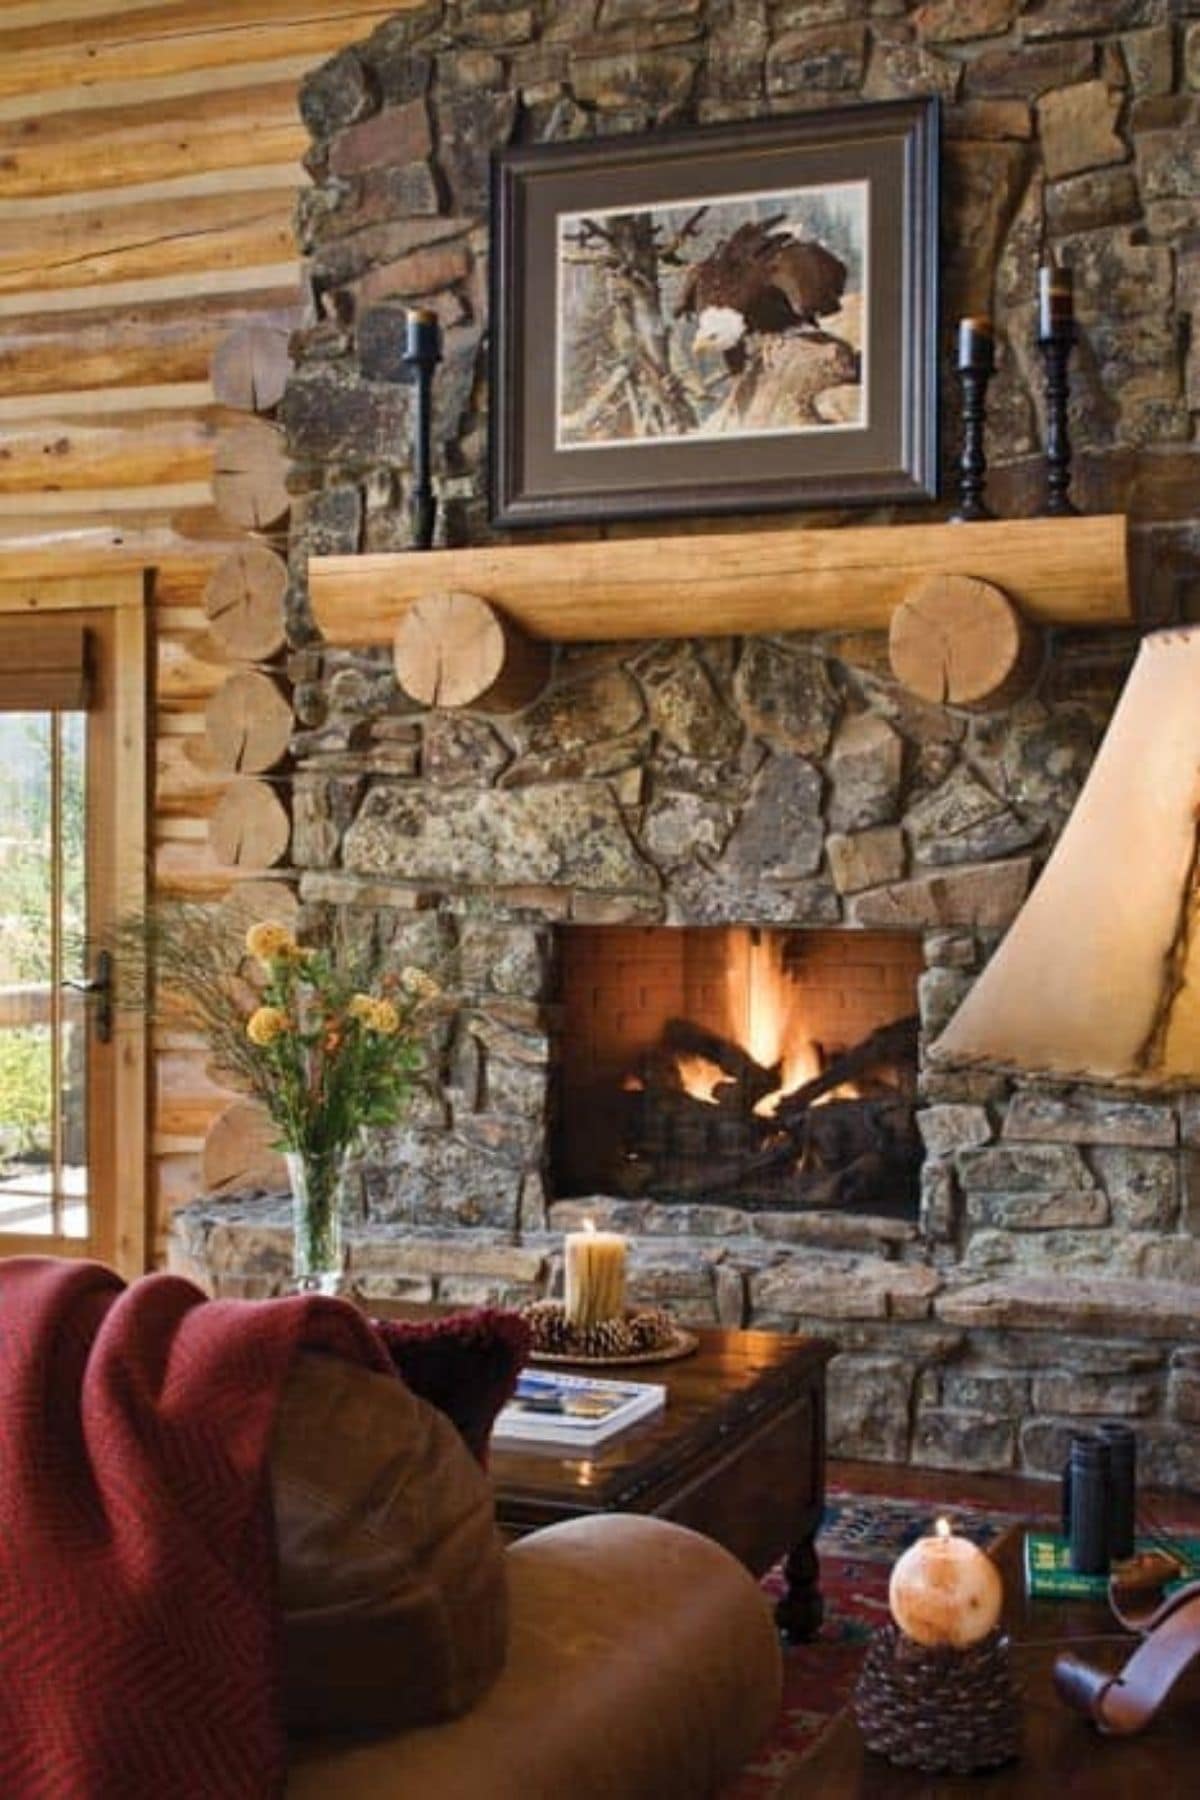 stone fireplace with wood mantle holding picture